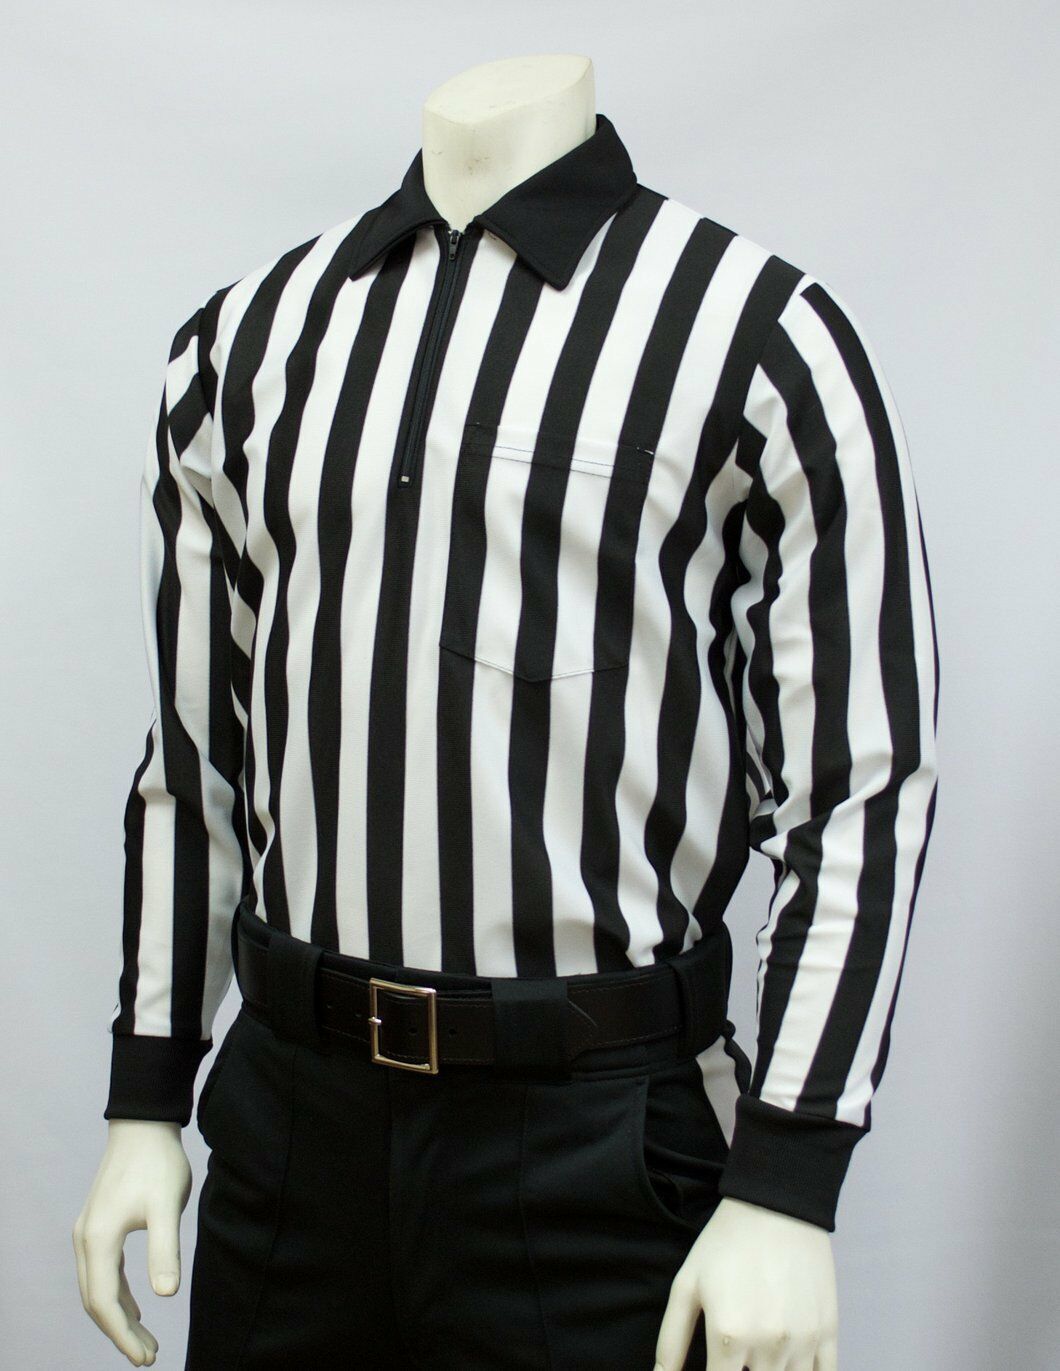 Smitty Referee Long Sleeve Shirt For Lacrosse and Football 1" Stripes